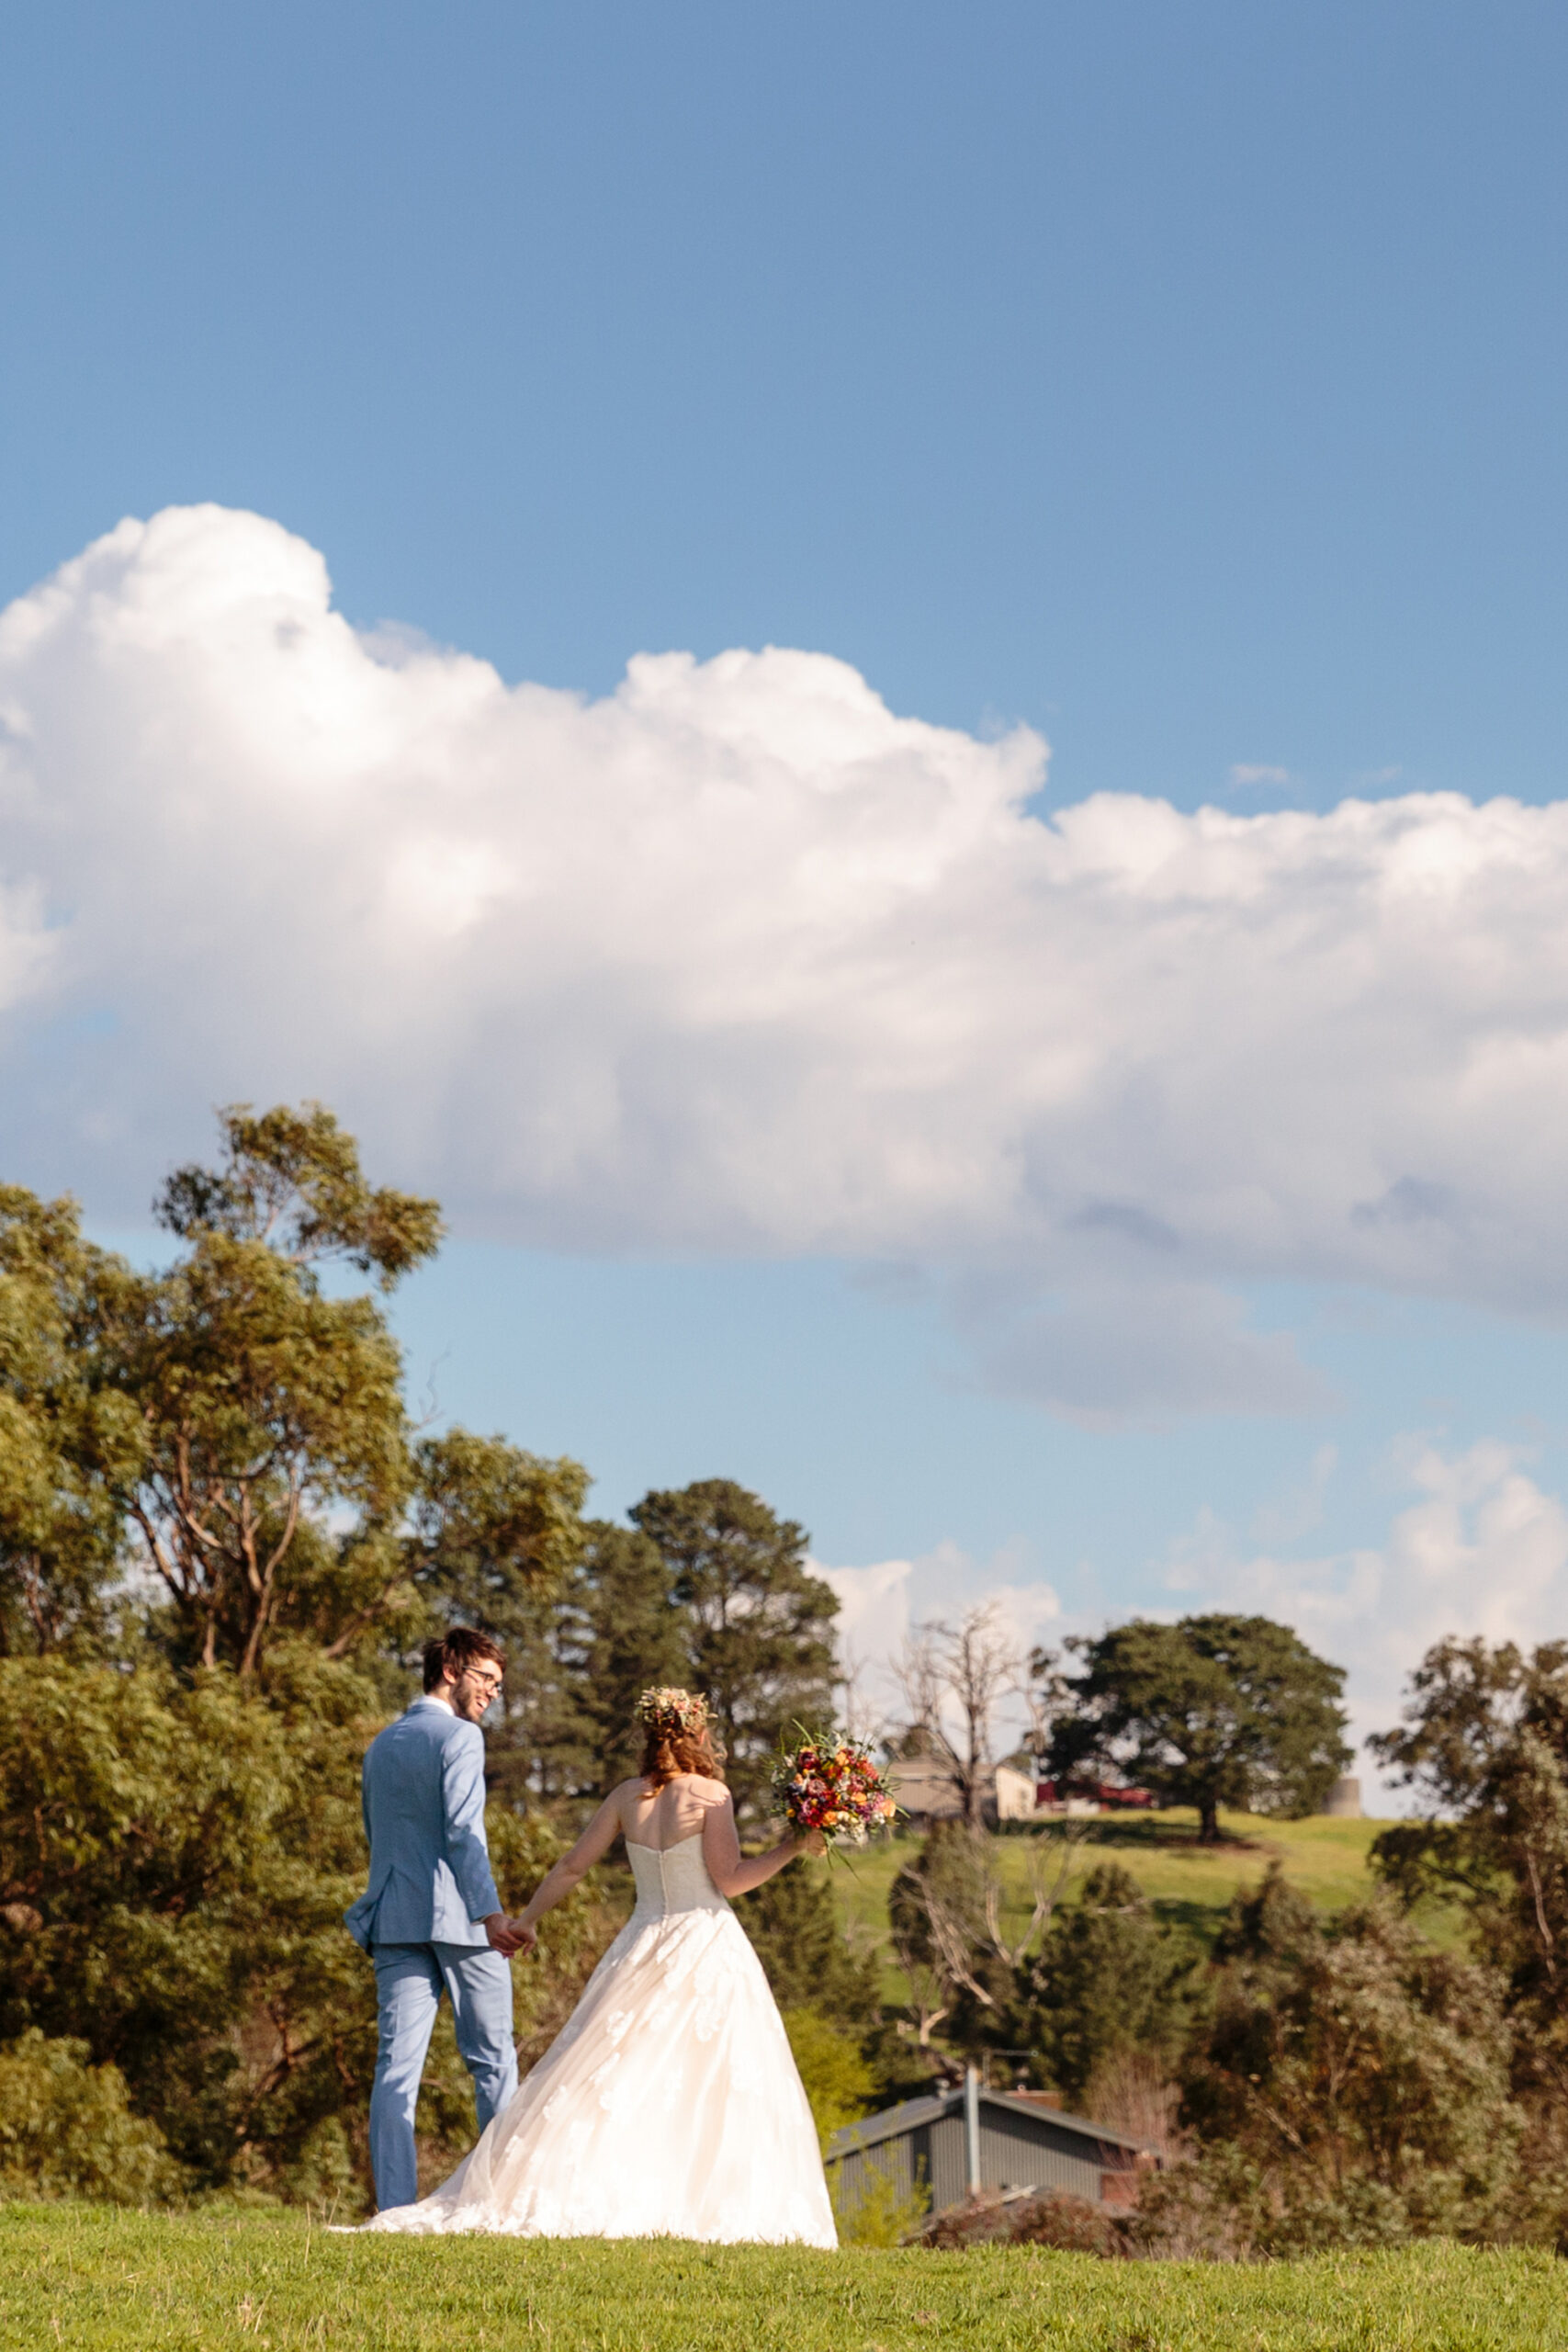 Stacey_Andrew_Rustic-Farm-Wedding_Alan-Rogers-Photography_SBS_021